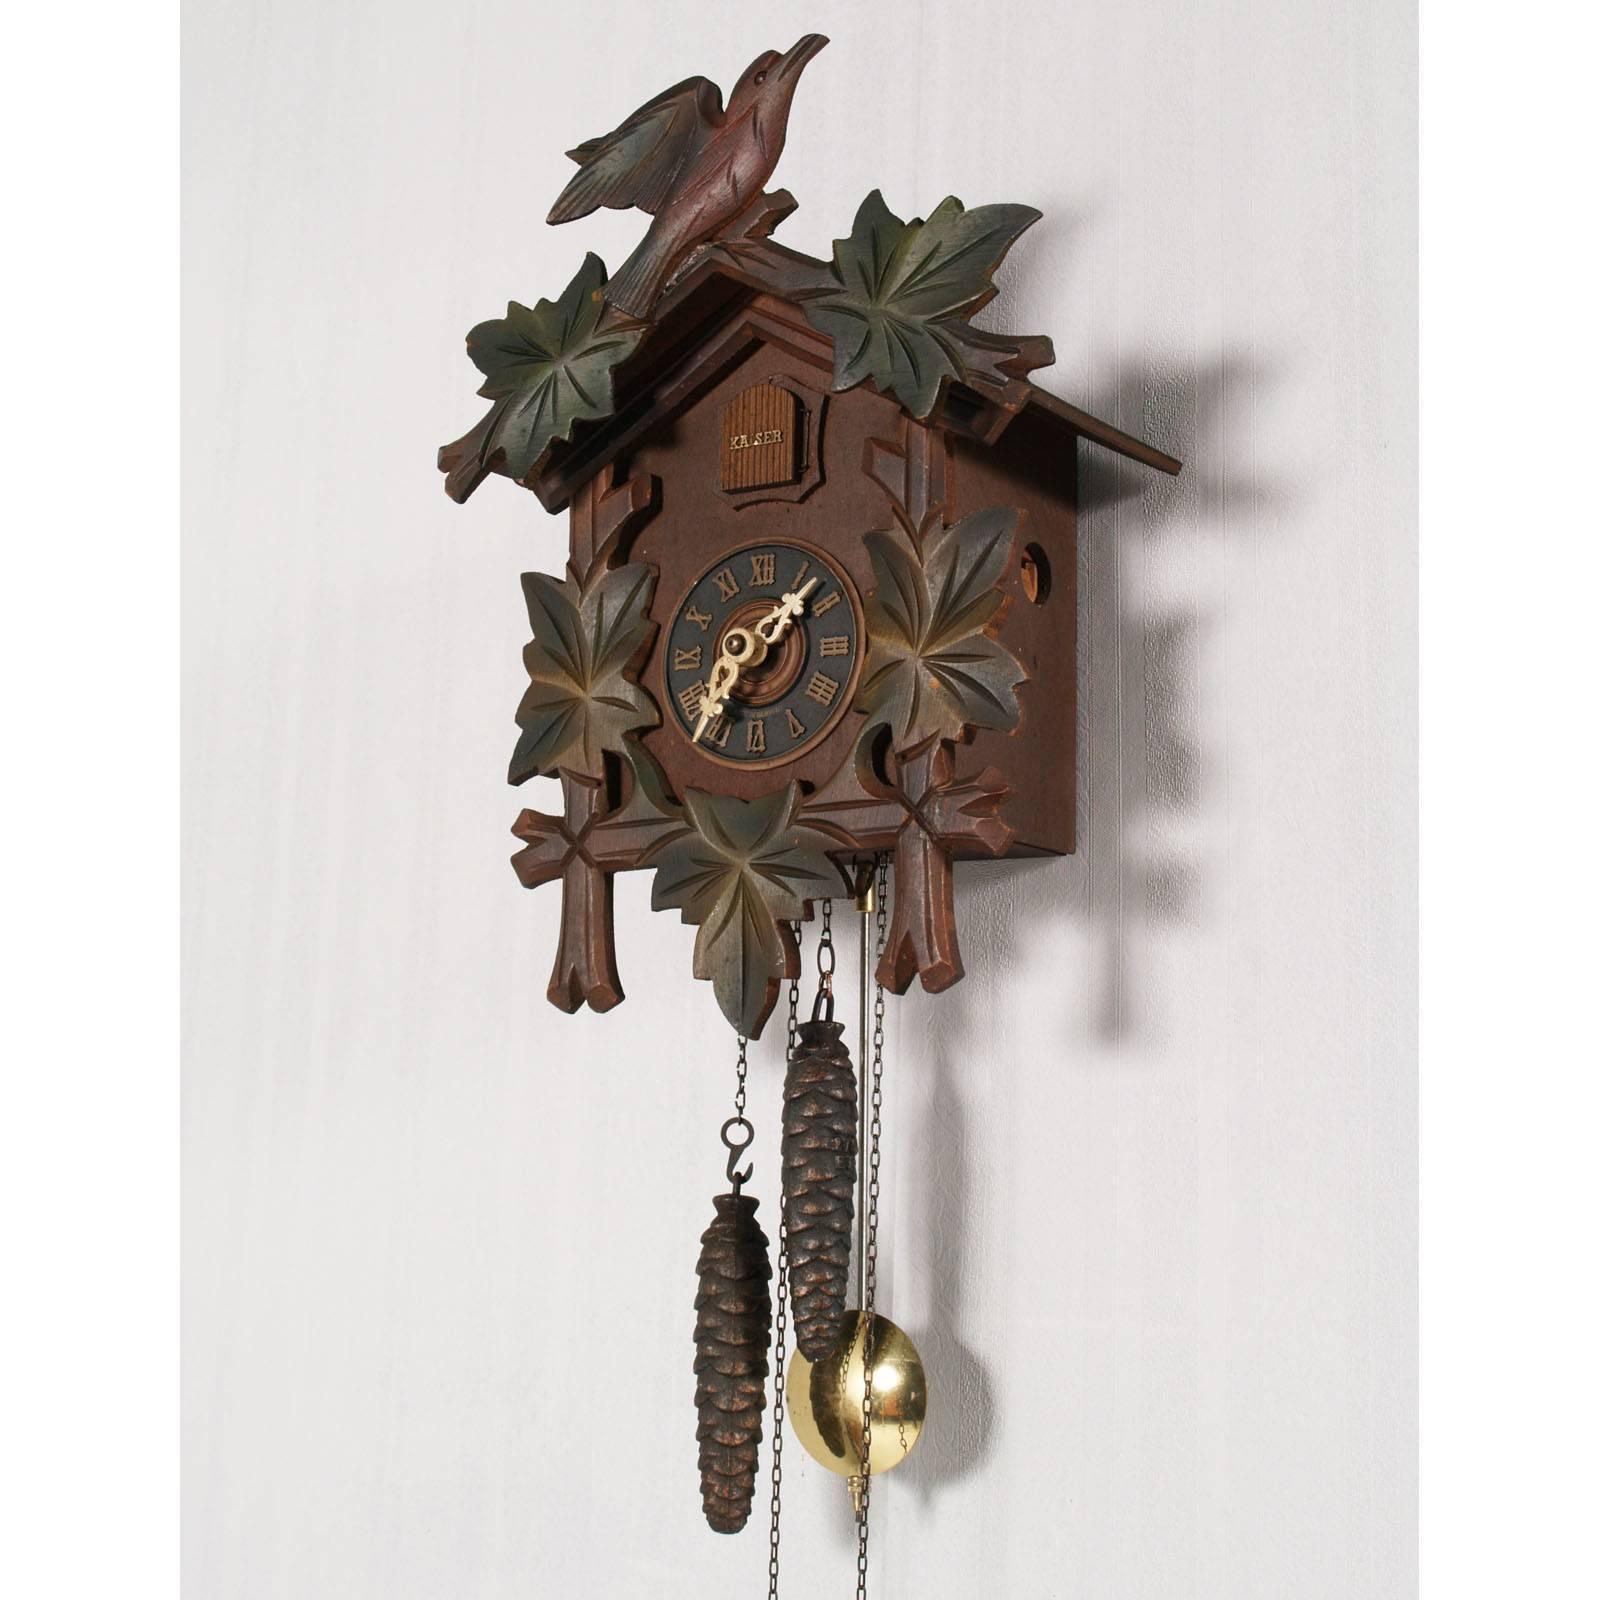 Black forest carved wood cuckoo clock with birds.
Running, all original with Kaiser mechanism
it plays with bird output every half hour.
Measure in cm: H 33 x W 25 x D 16.

The watch is a KAISER, trademark of 